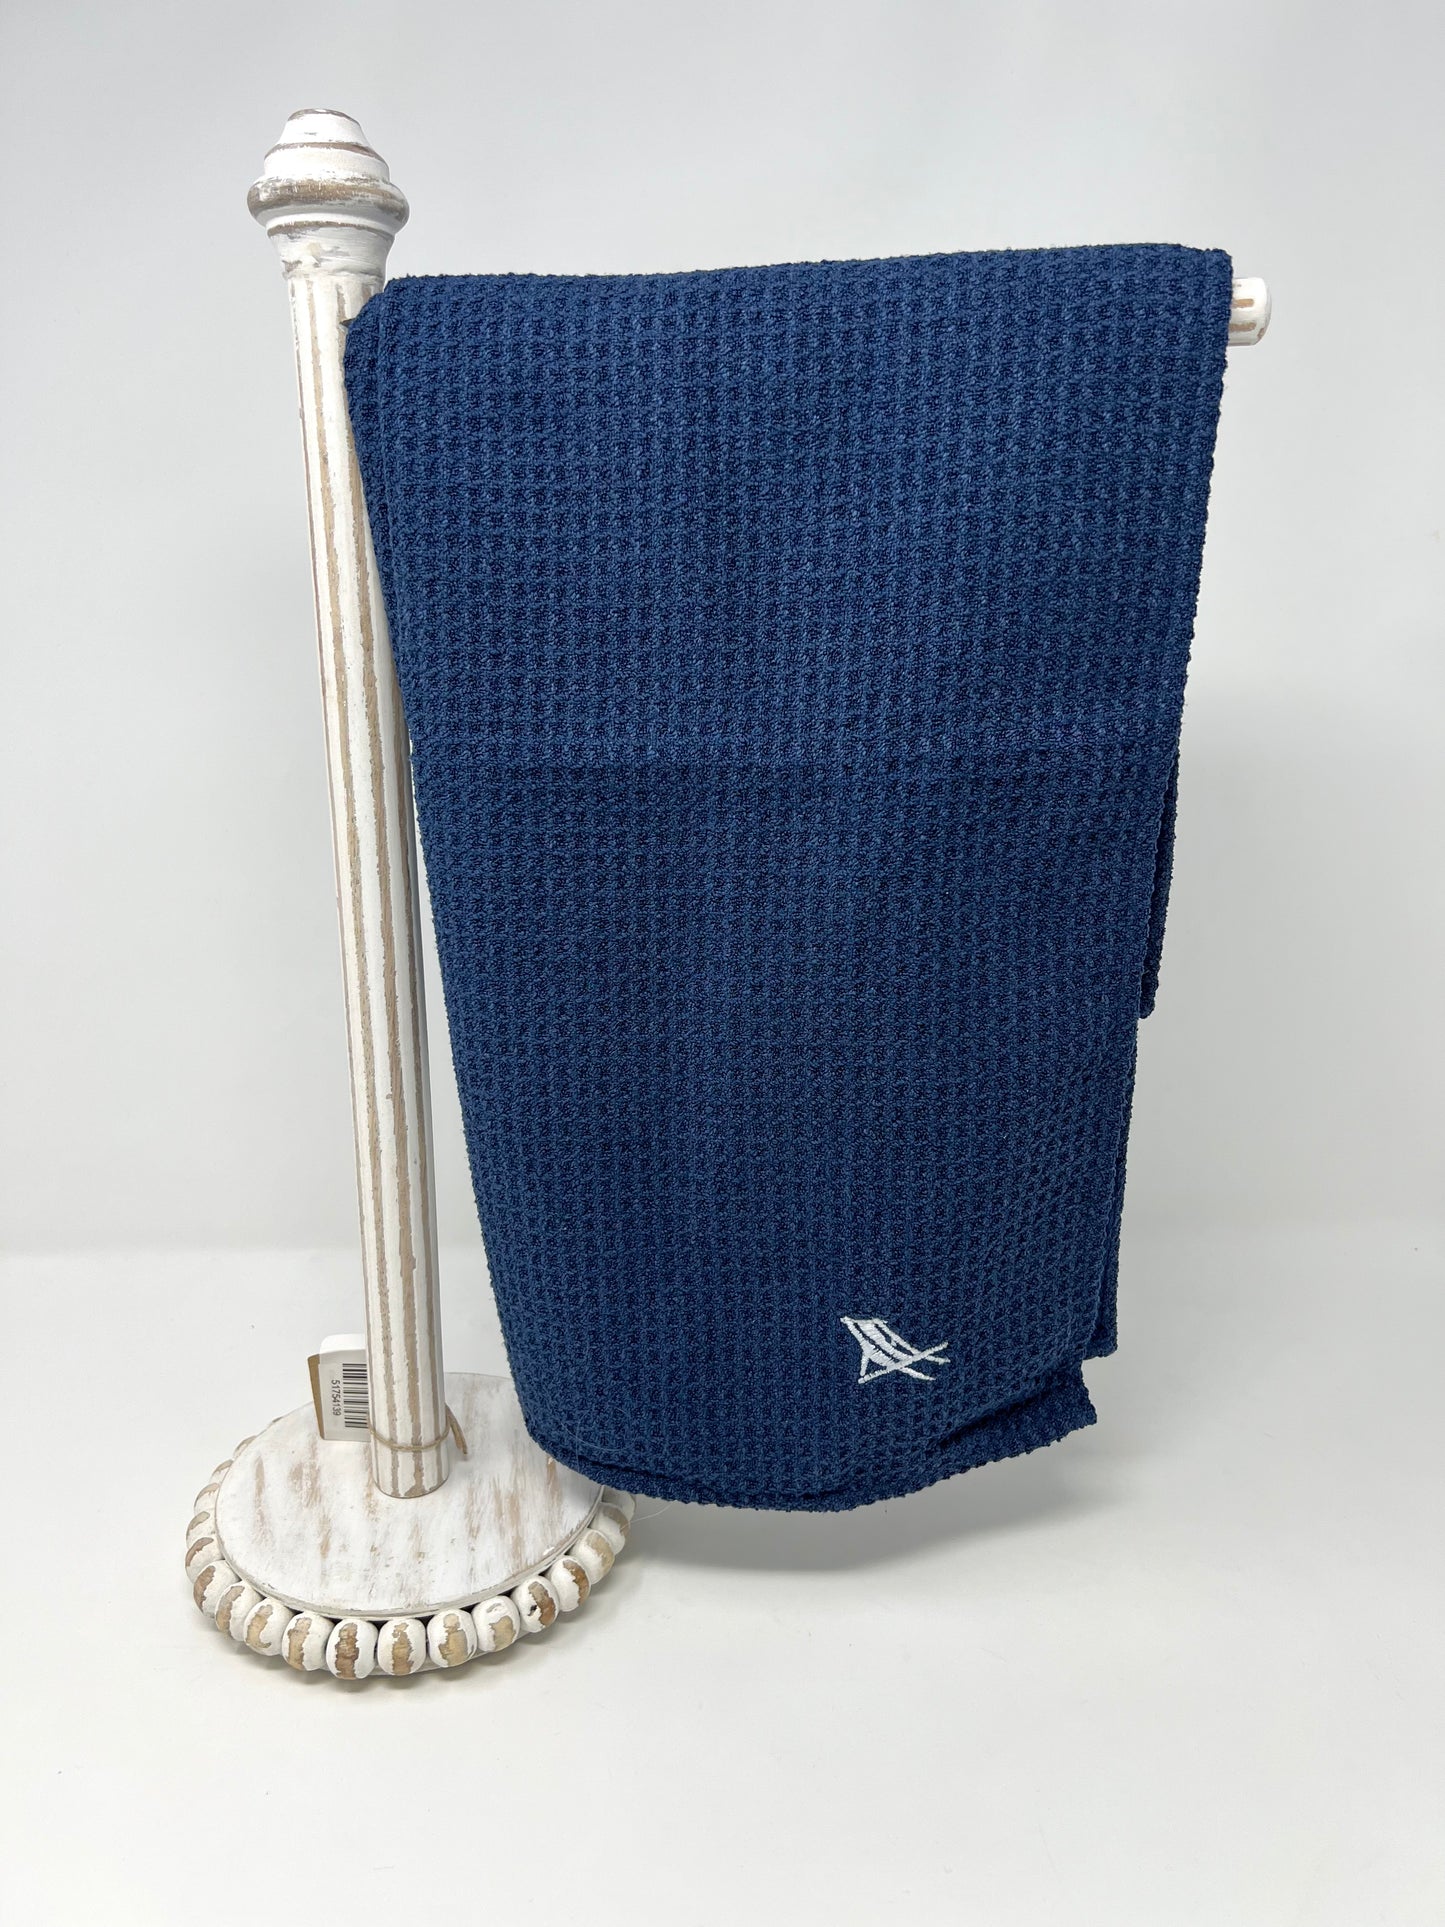 Quick Dry Small Hand Towel - Nautical Navy Textiles Dock & Bay   